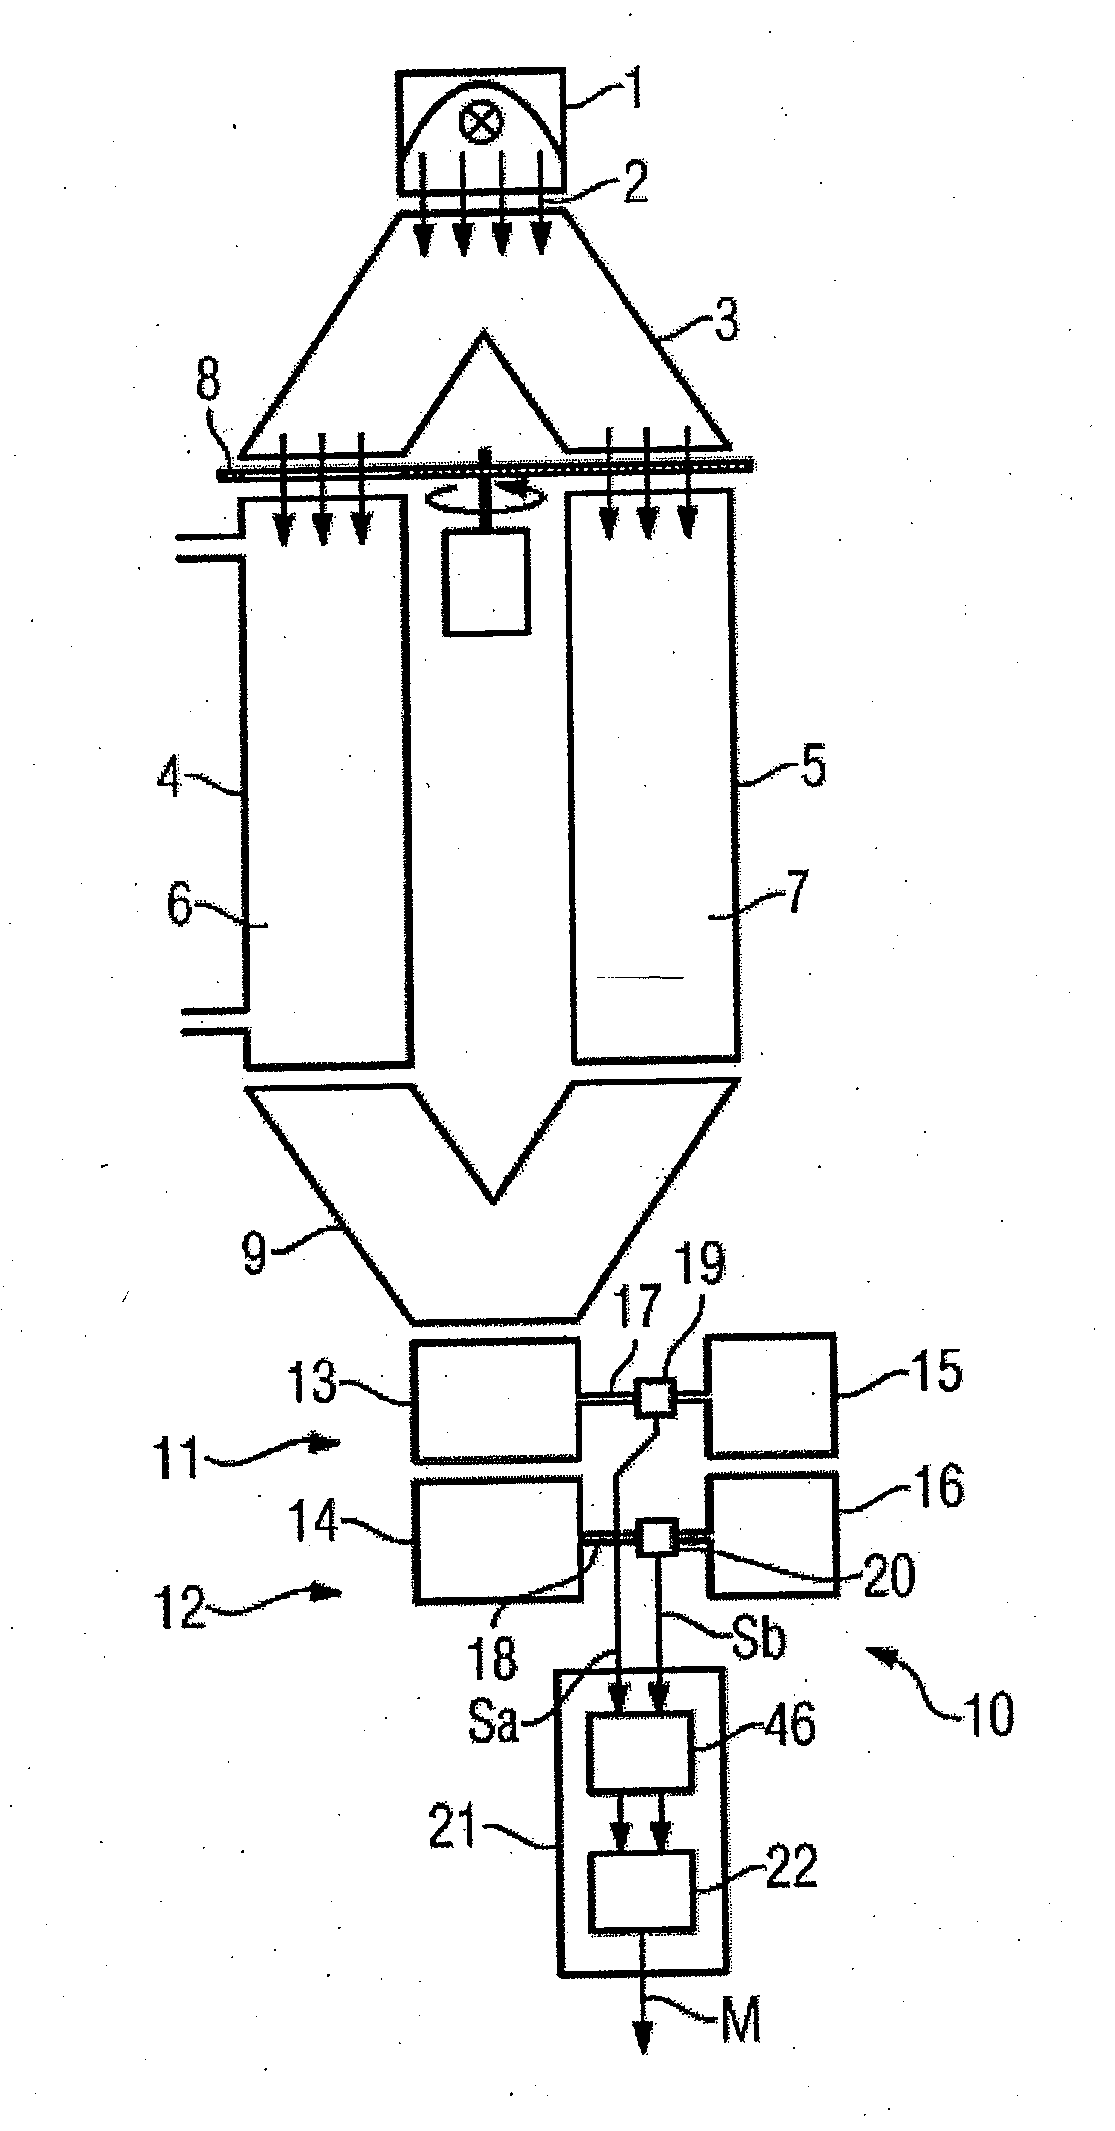 NDIR-two Beam Gas Analyser And Method For Determining The Concentration Of A Measuring Gas Component in a Gas Mixture by means of Said type of Gas Analyser